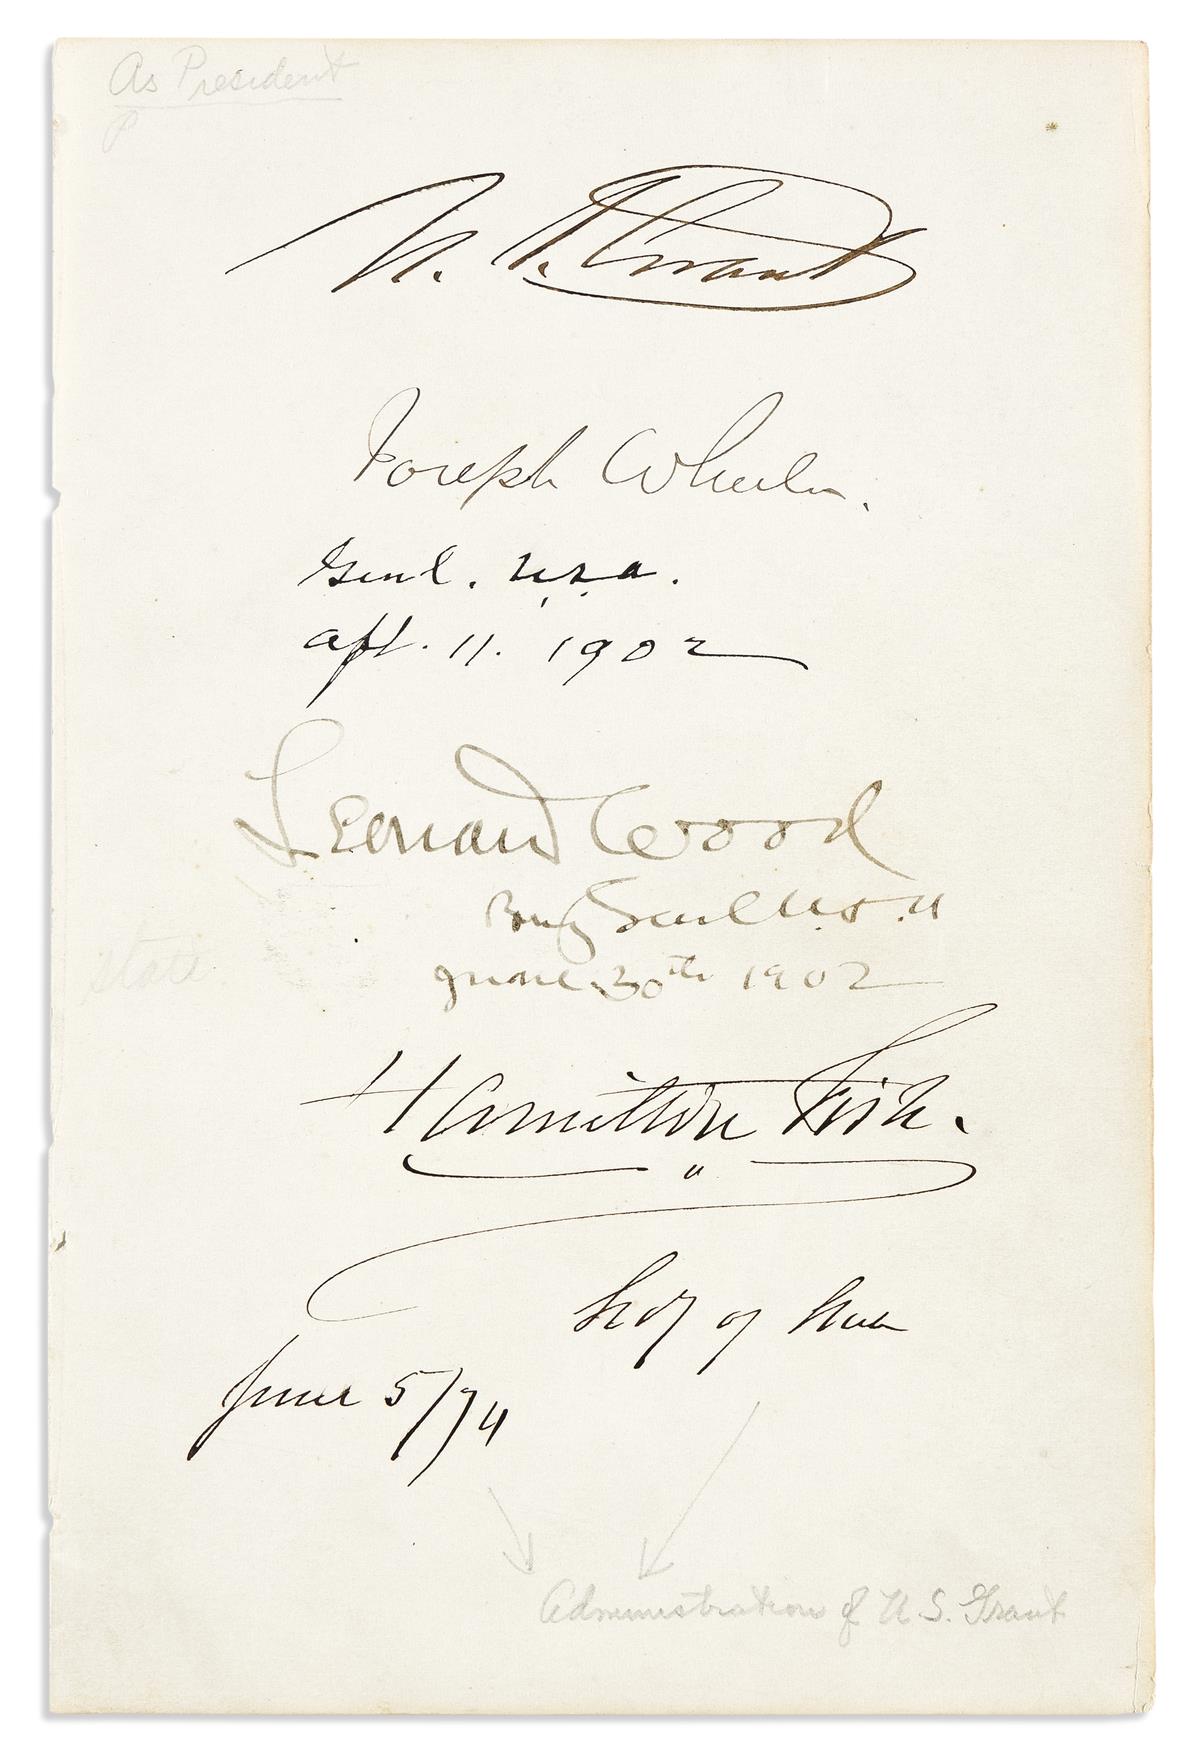 GRANT, ULYSSES S. Signature, U.S. Grant, on a sheet additionally signed by his Secretary of State Hamilton Fish,